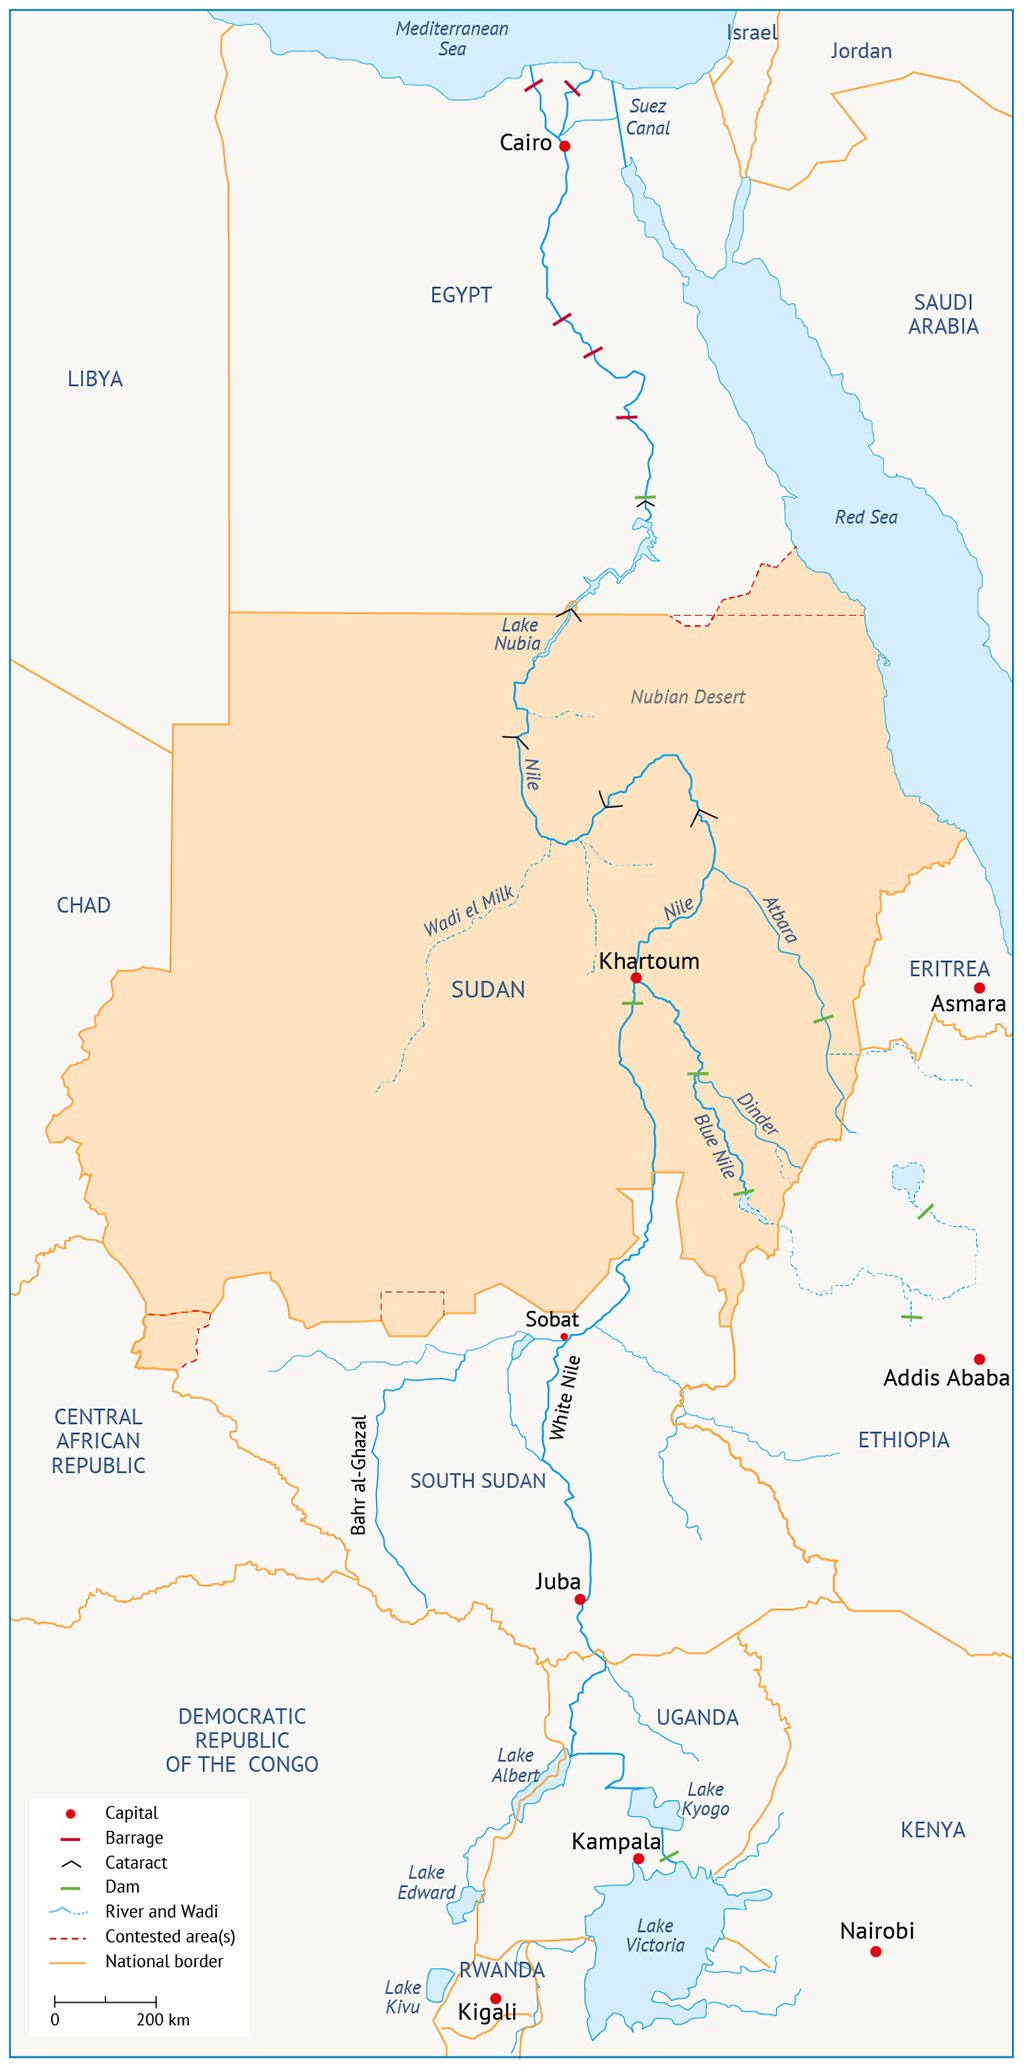 River Nile Basin - Shared water resources in Sudan